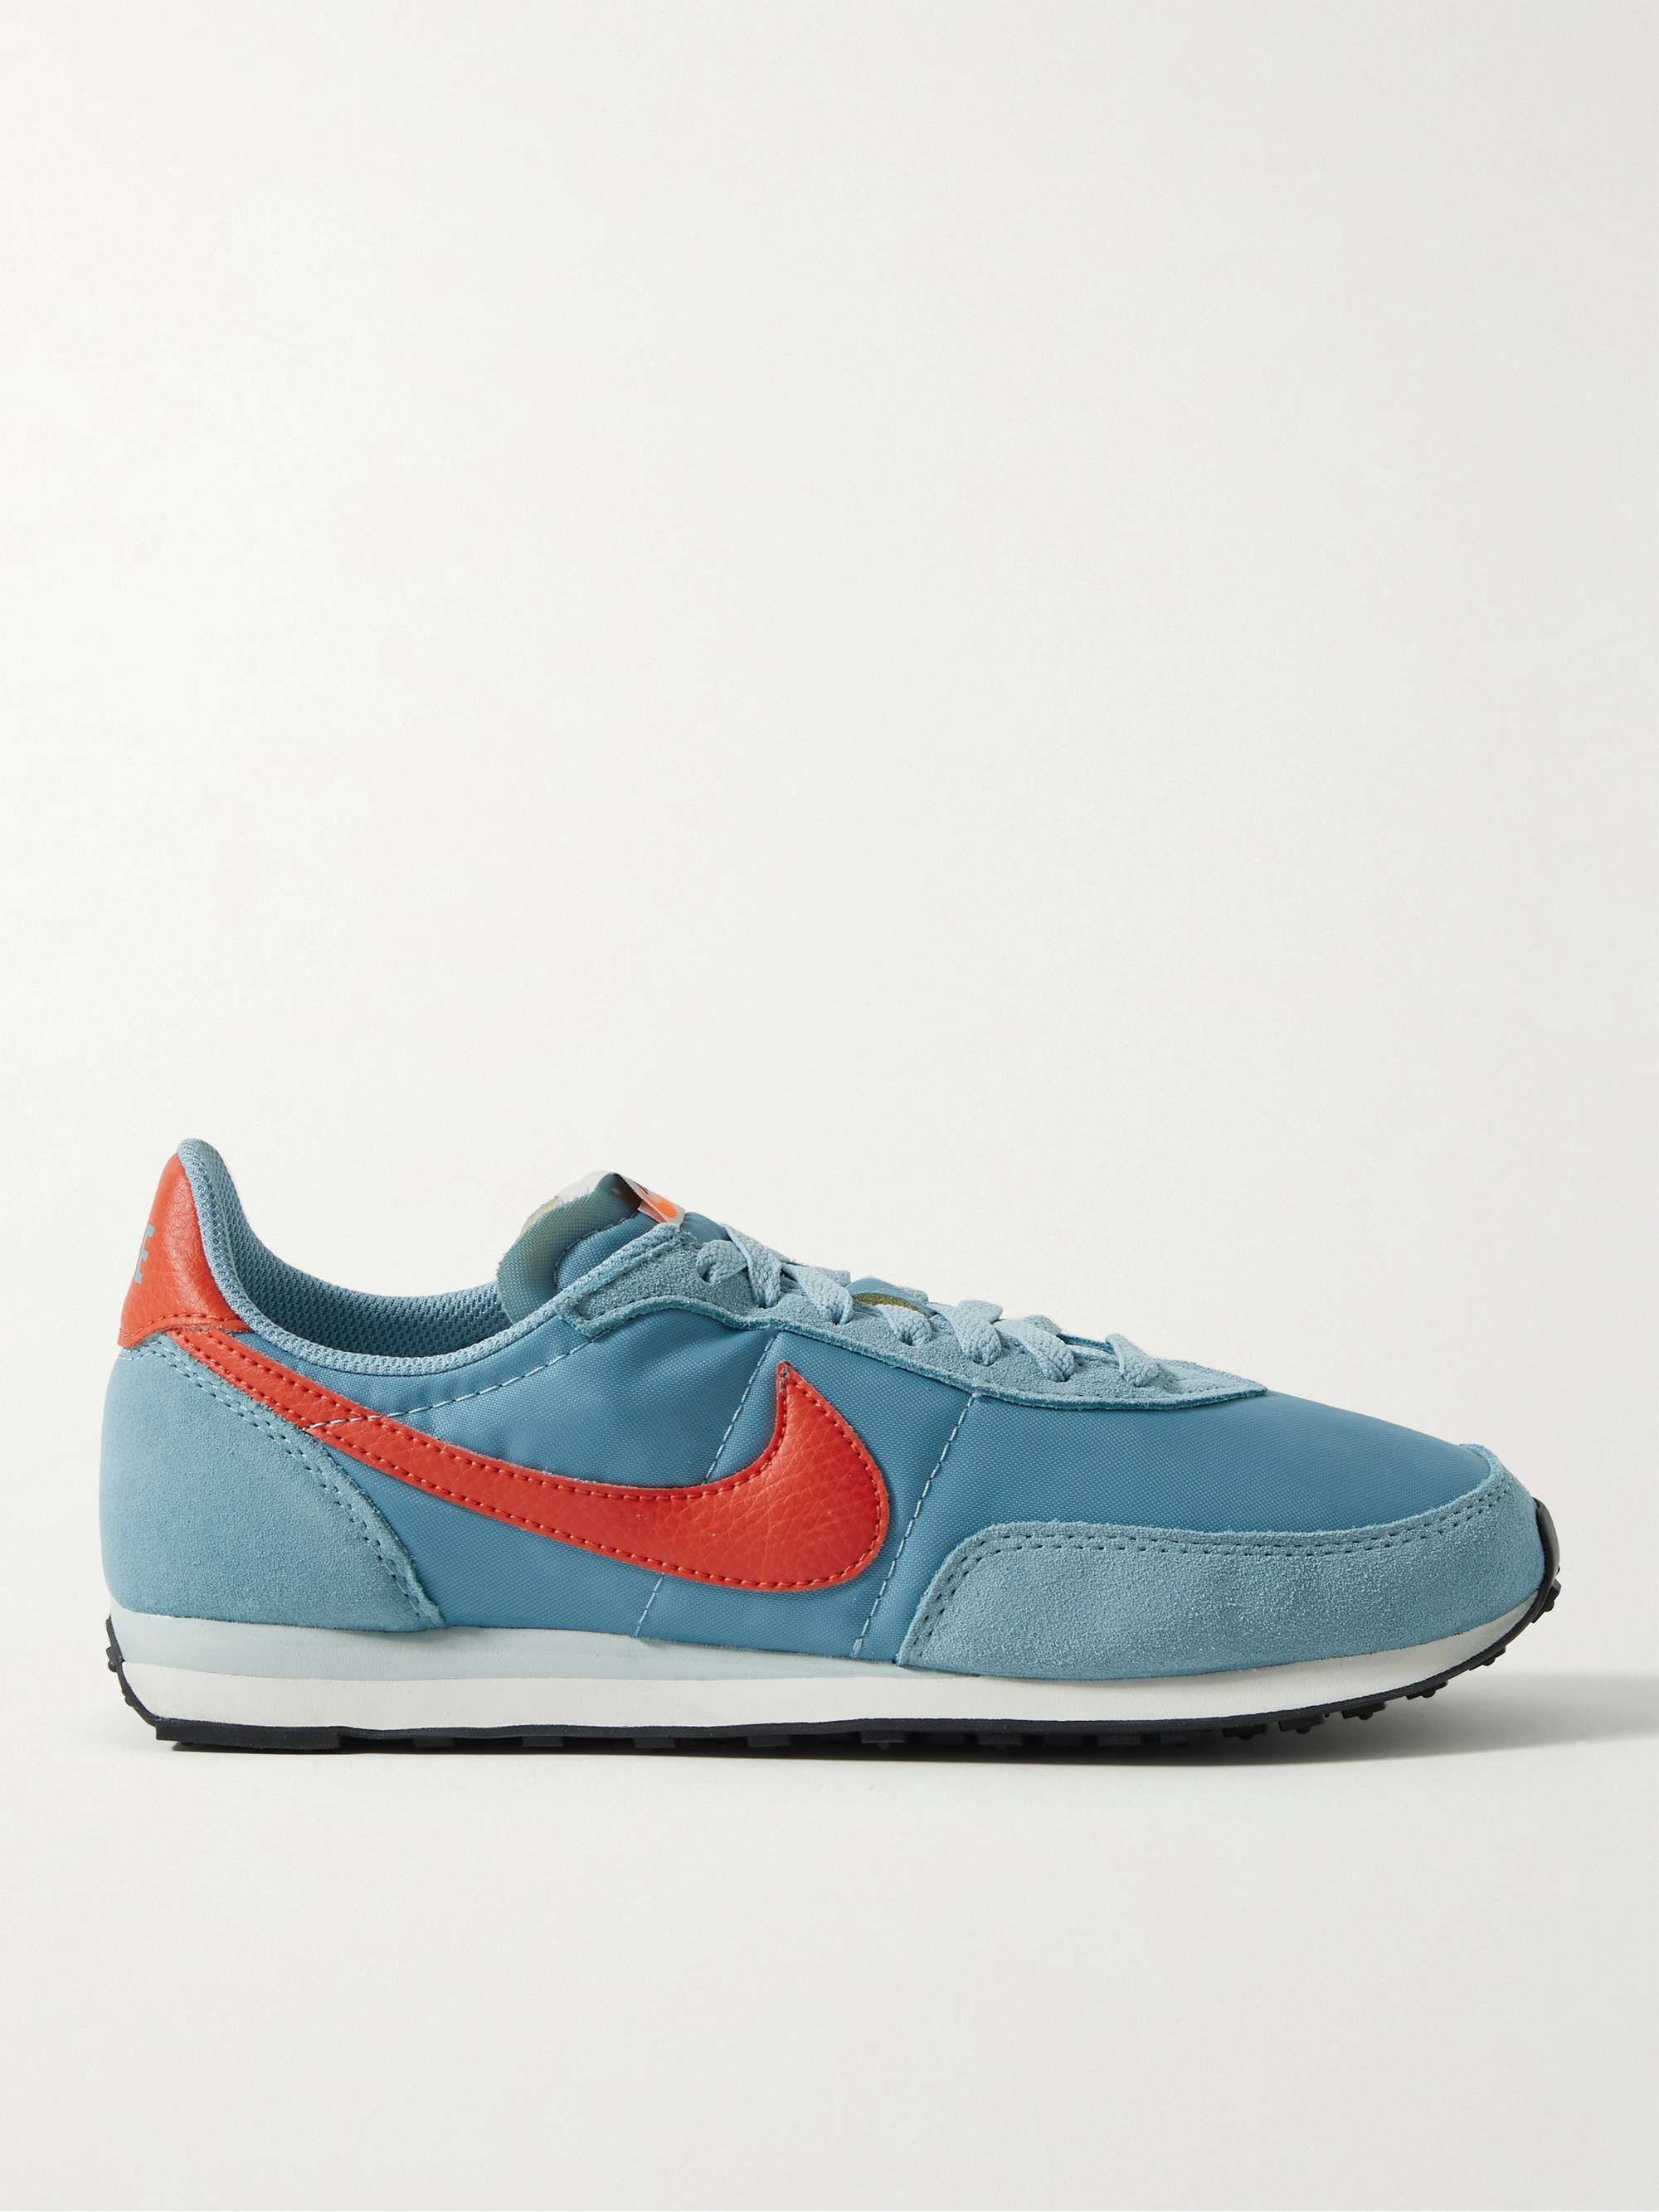 Waffle 2 SP blue nike waffle Leather and Suede-Trimmed Nylon Sneakers